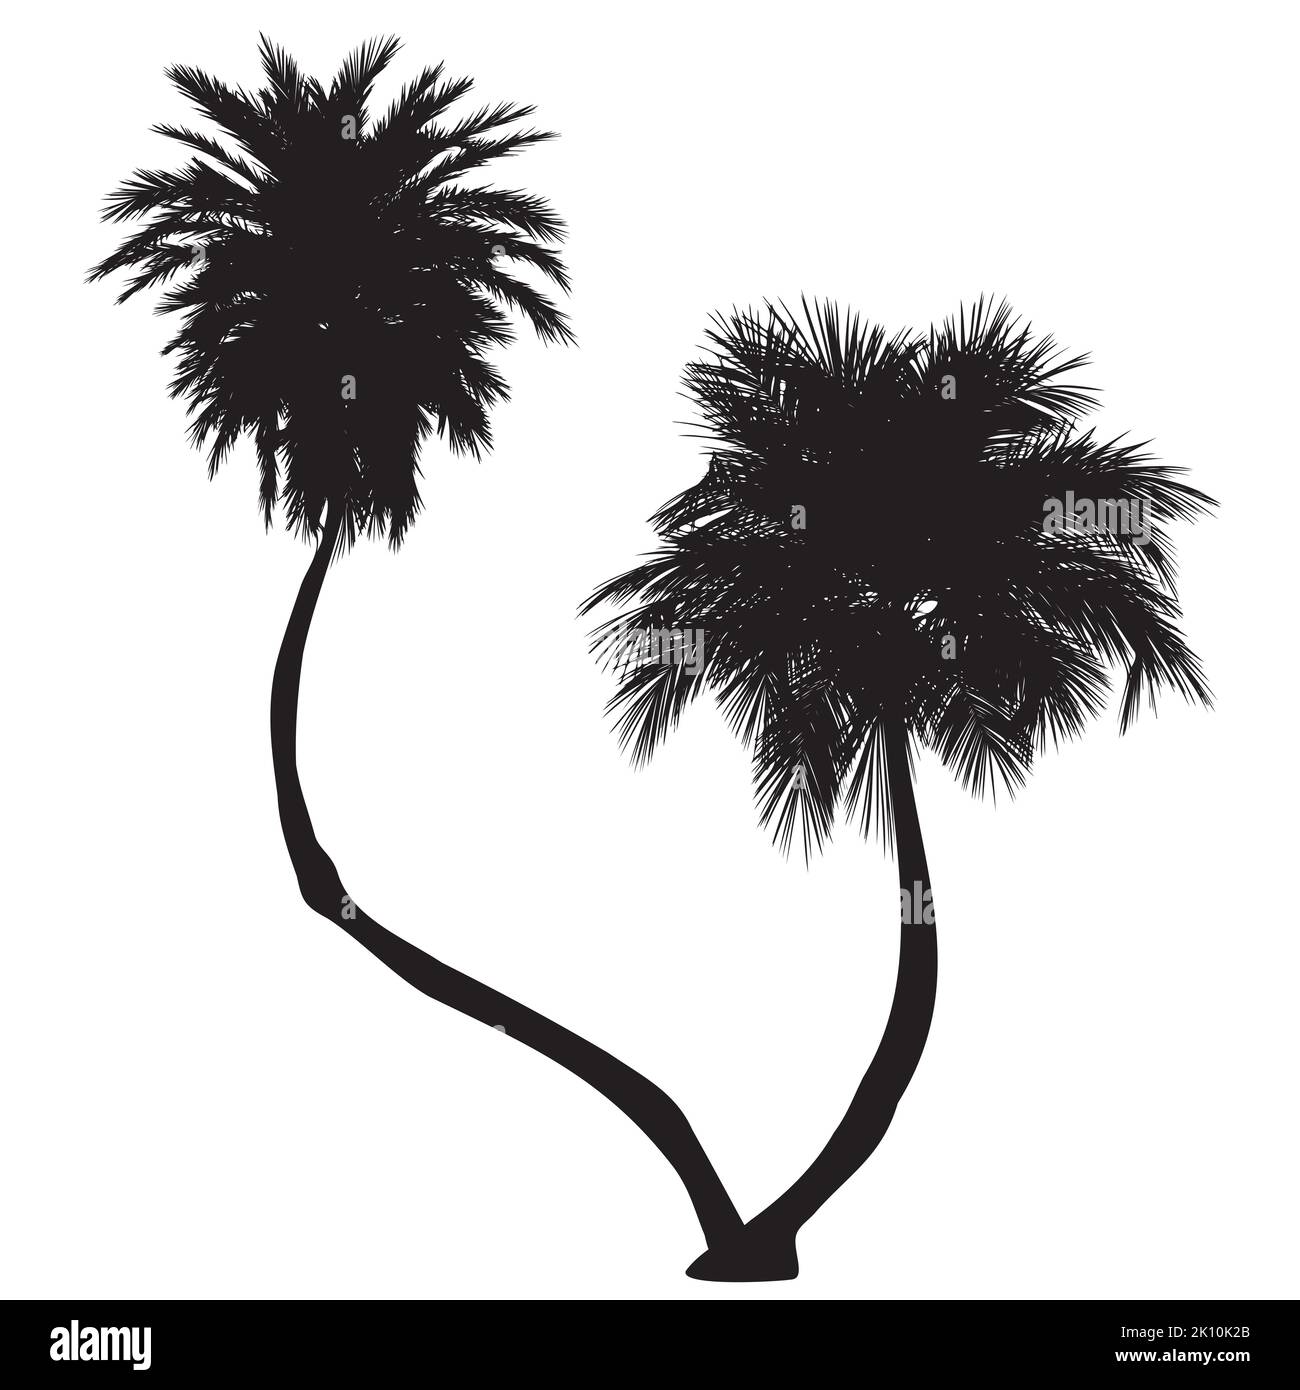 Detailed two palm trees black silhouettes illustration Stock Vector ...